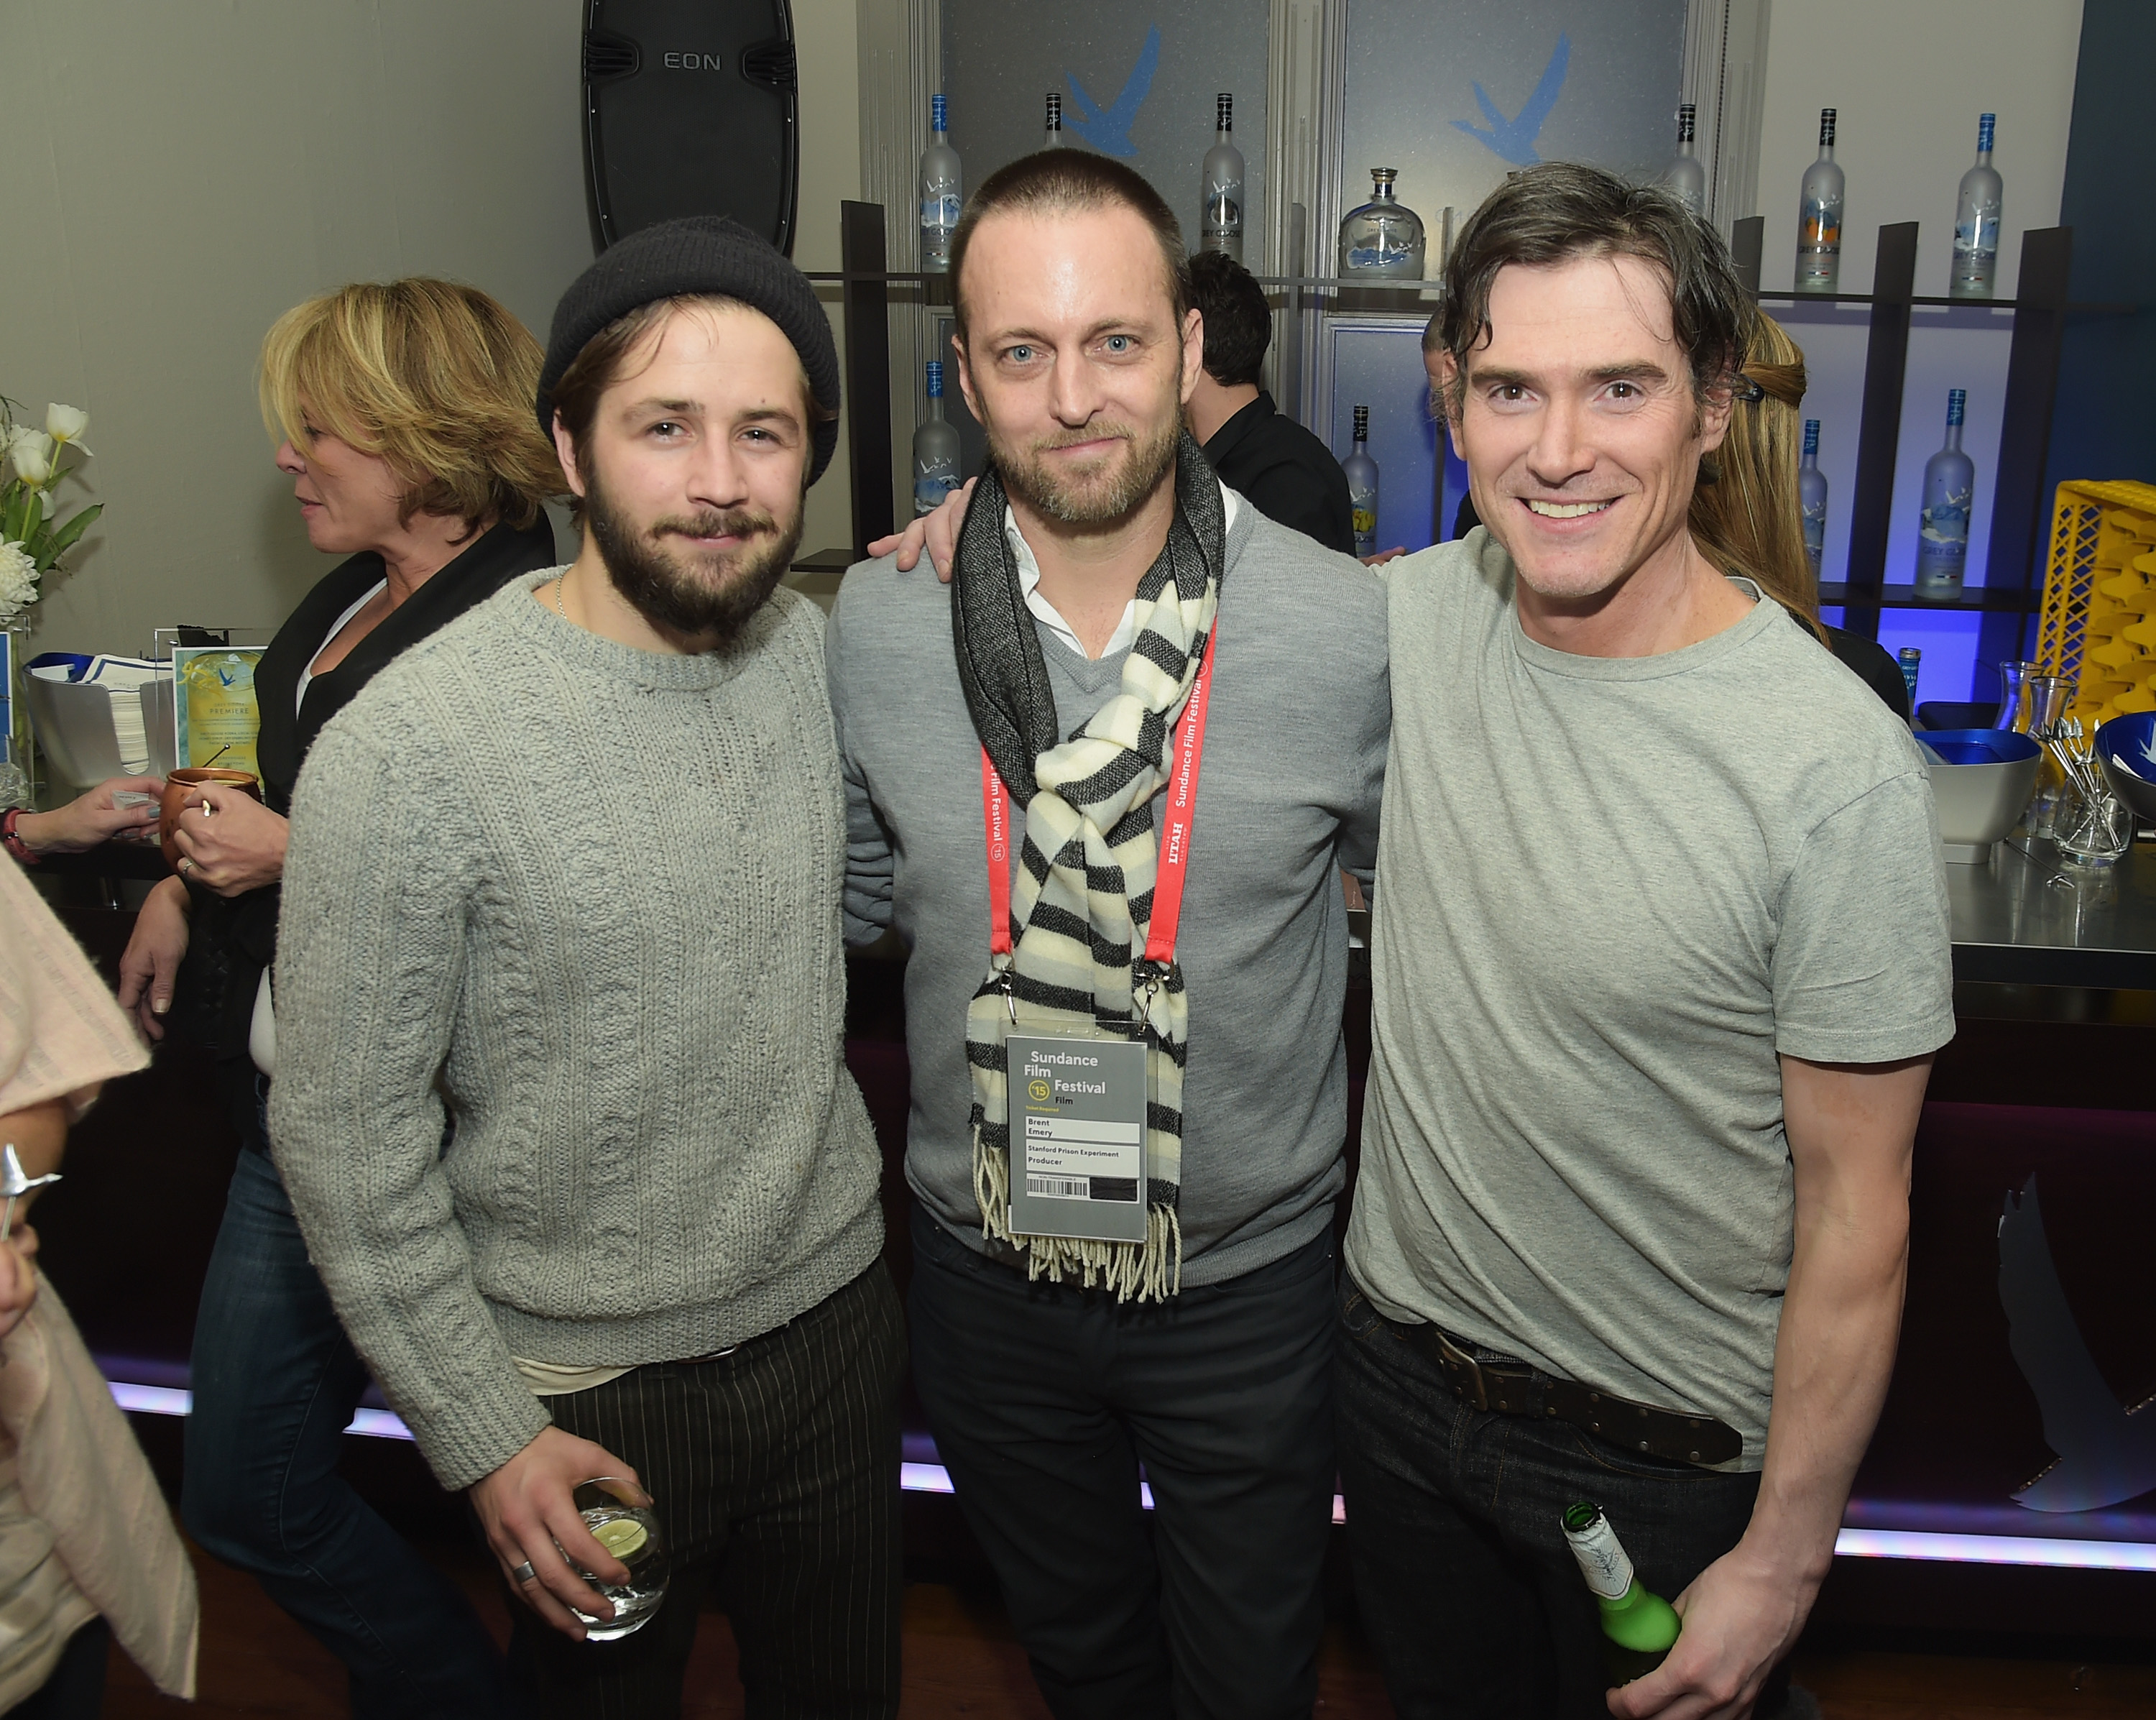 Actor Michael Angarano, producer Brent Emery and actor Billy Crudup - GREY GOOSE Blue Door Hosts "The Stanford Prison Experiment" Party At Sundance - 2015 Park City